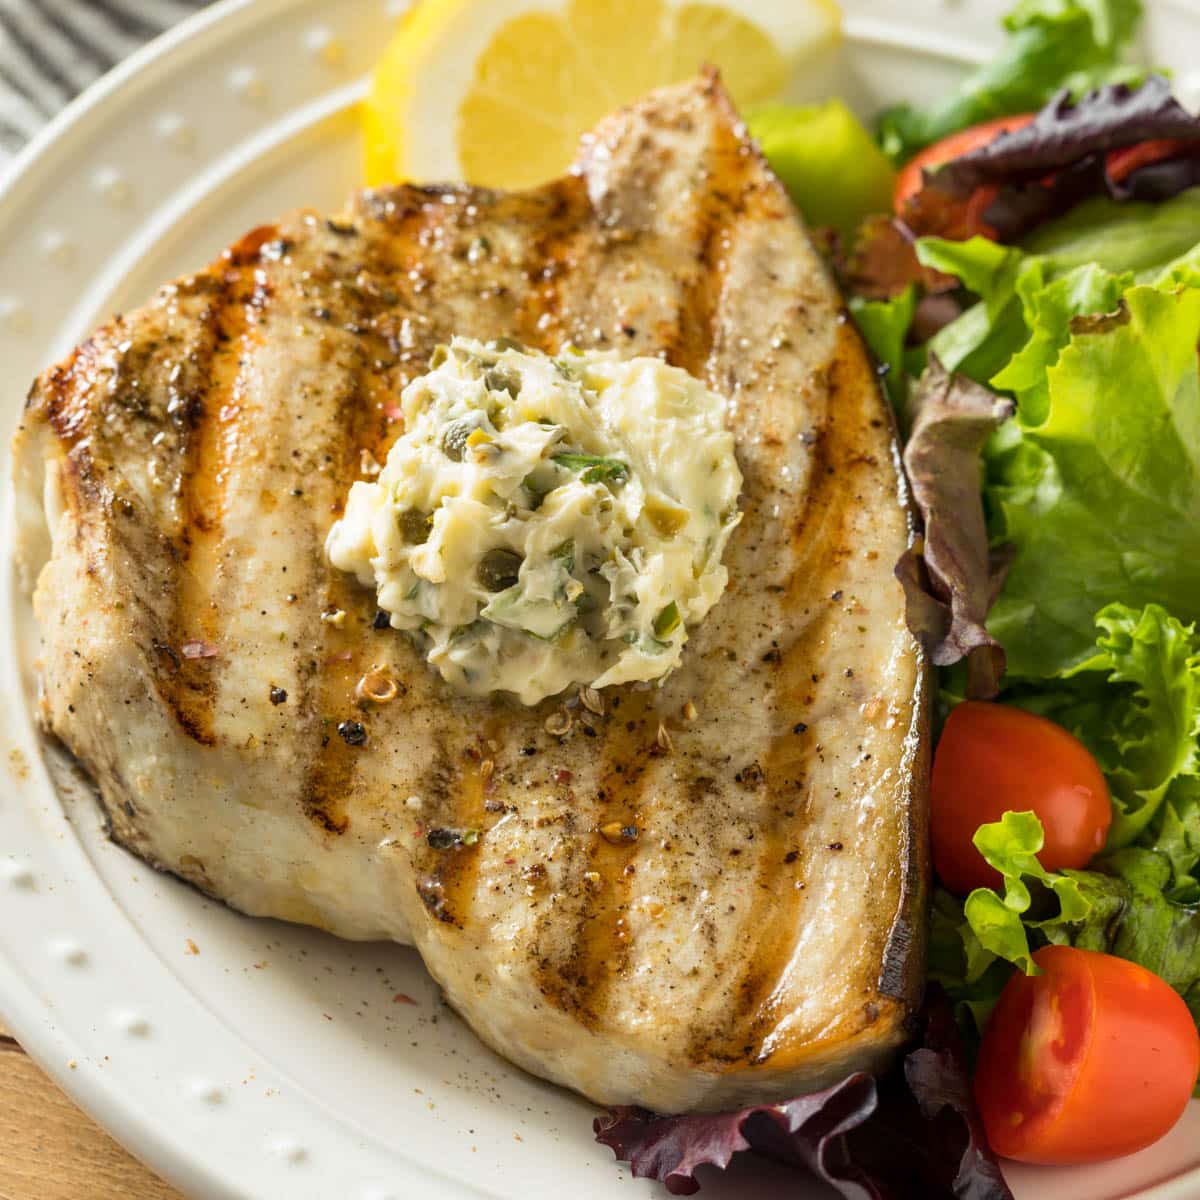 Grilled swordfish on a plate with a green salad and a lemon slice.